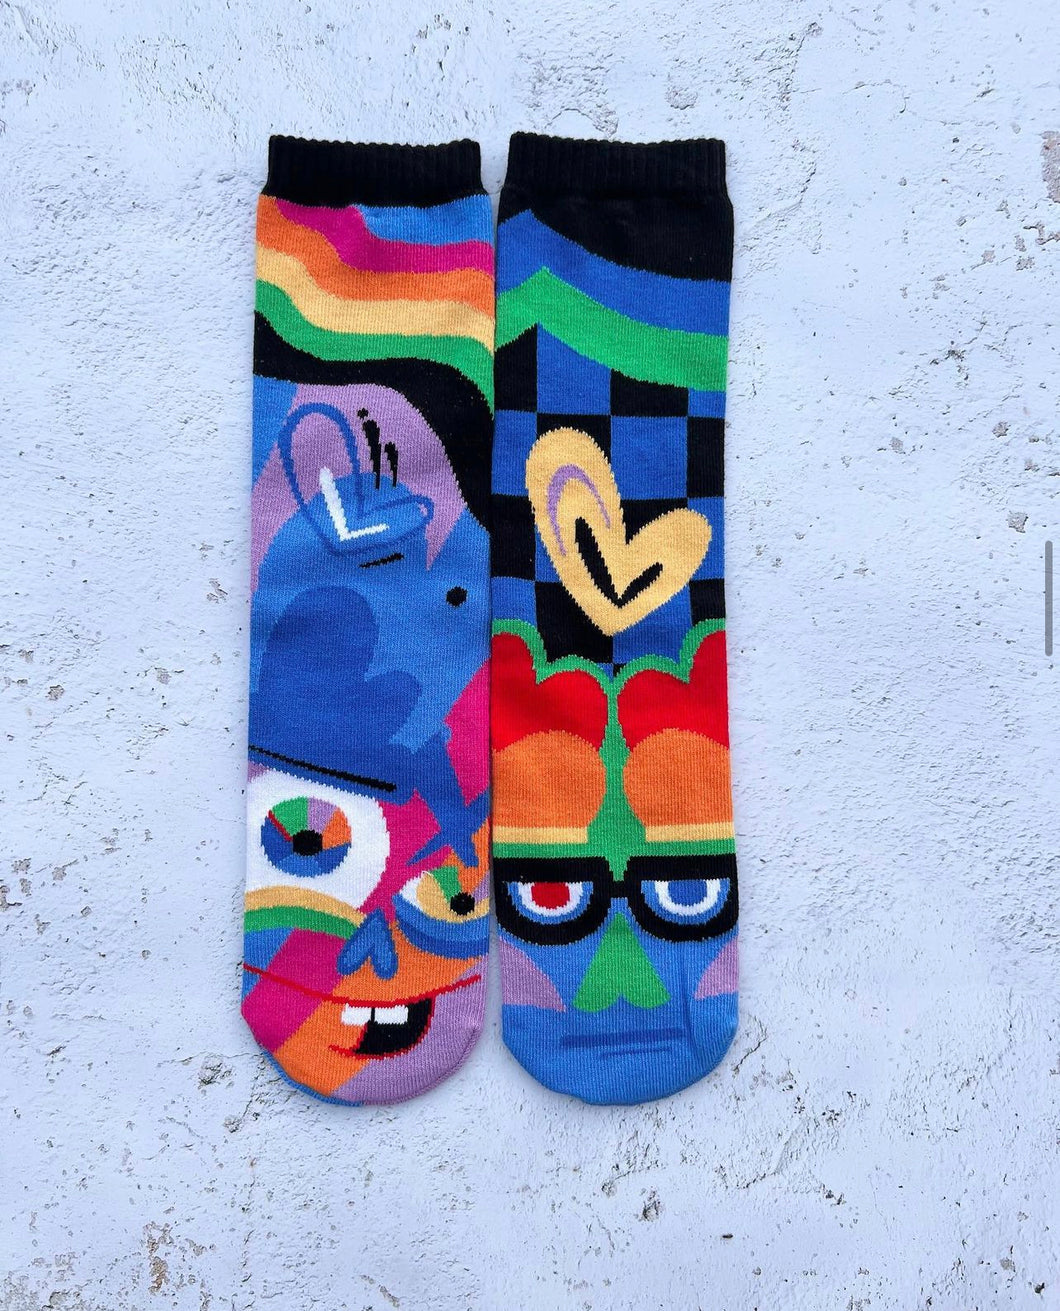 Silly & Serious | Adult Collectible Socks by Jason Naylor